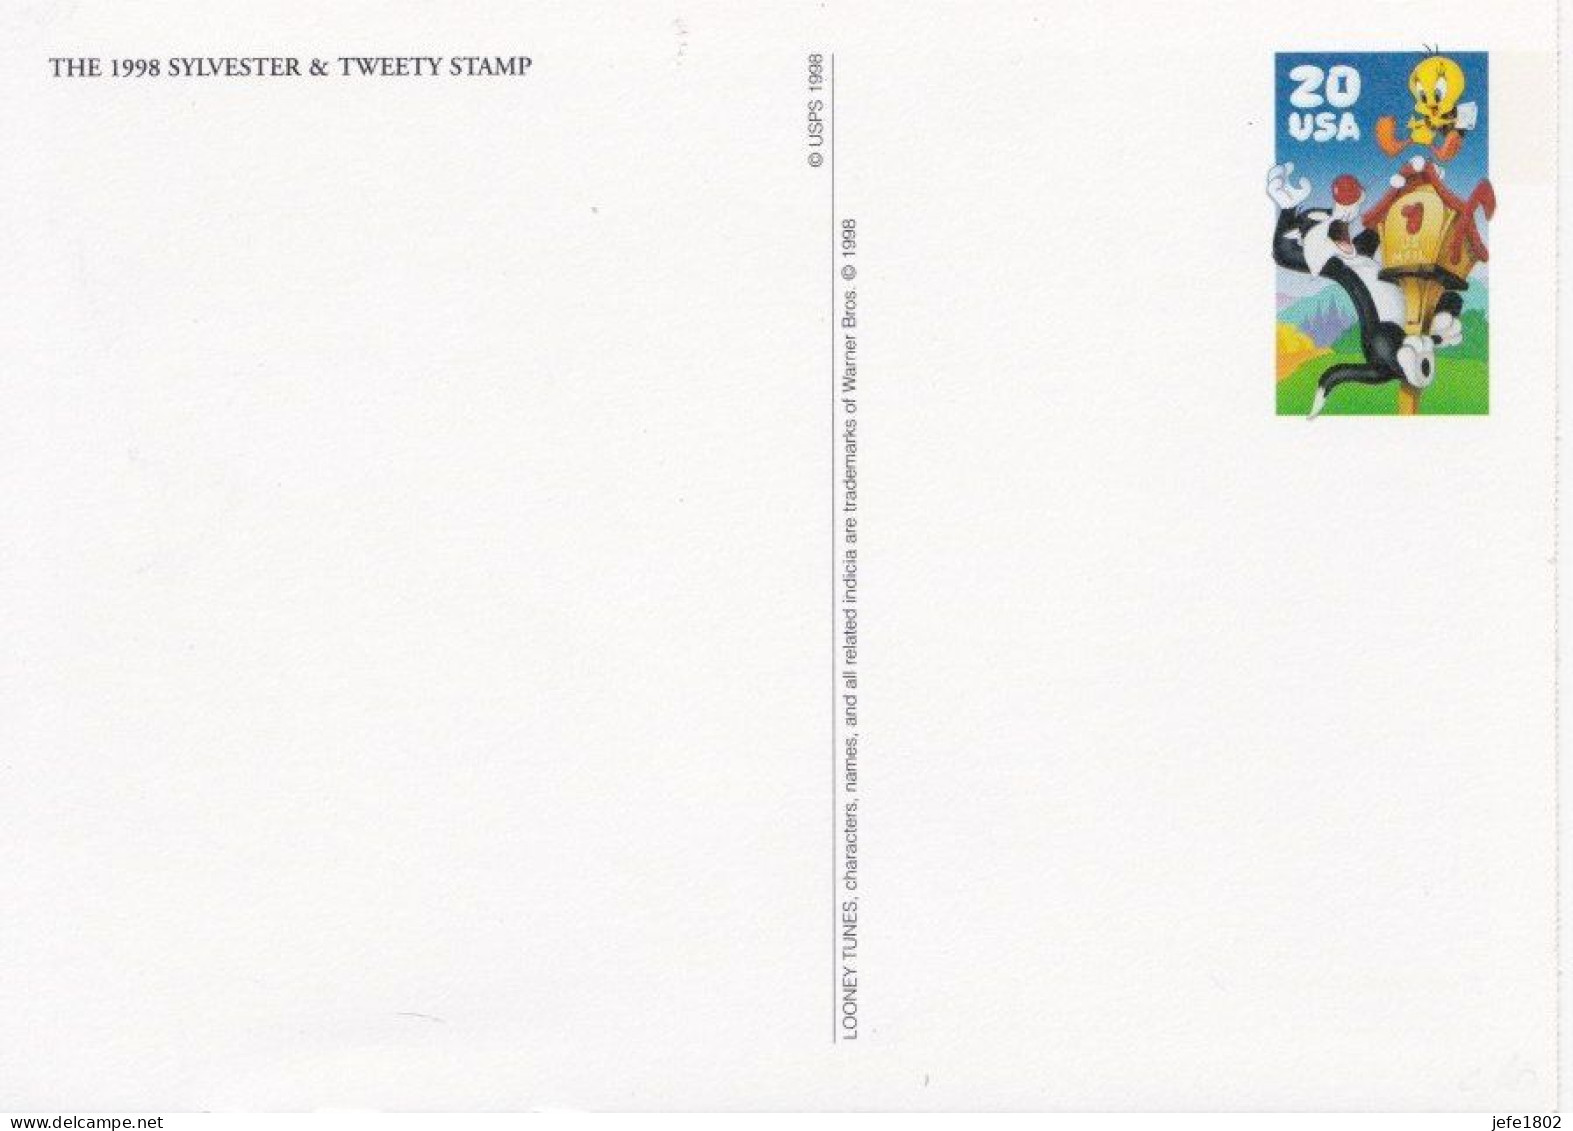 The 1998 Sylvester & Tweety Stamp On Postal Stationary - 2001-10